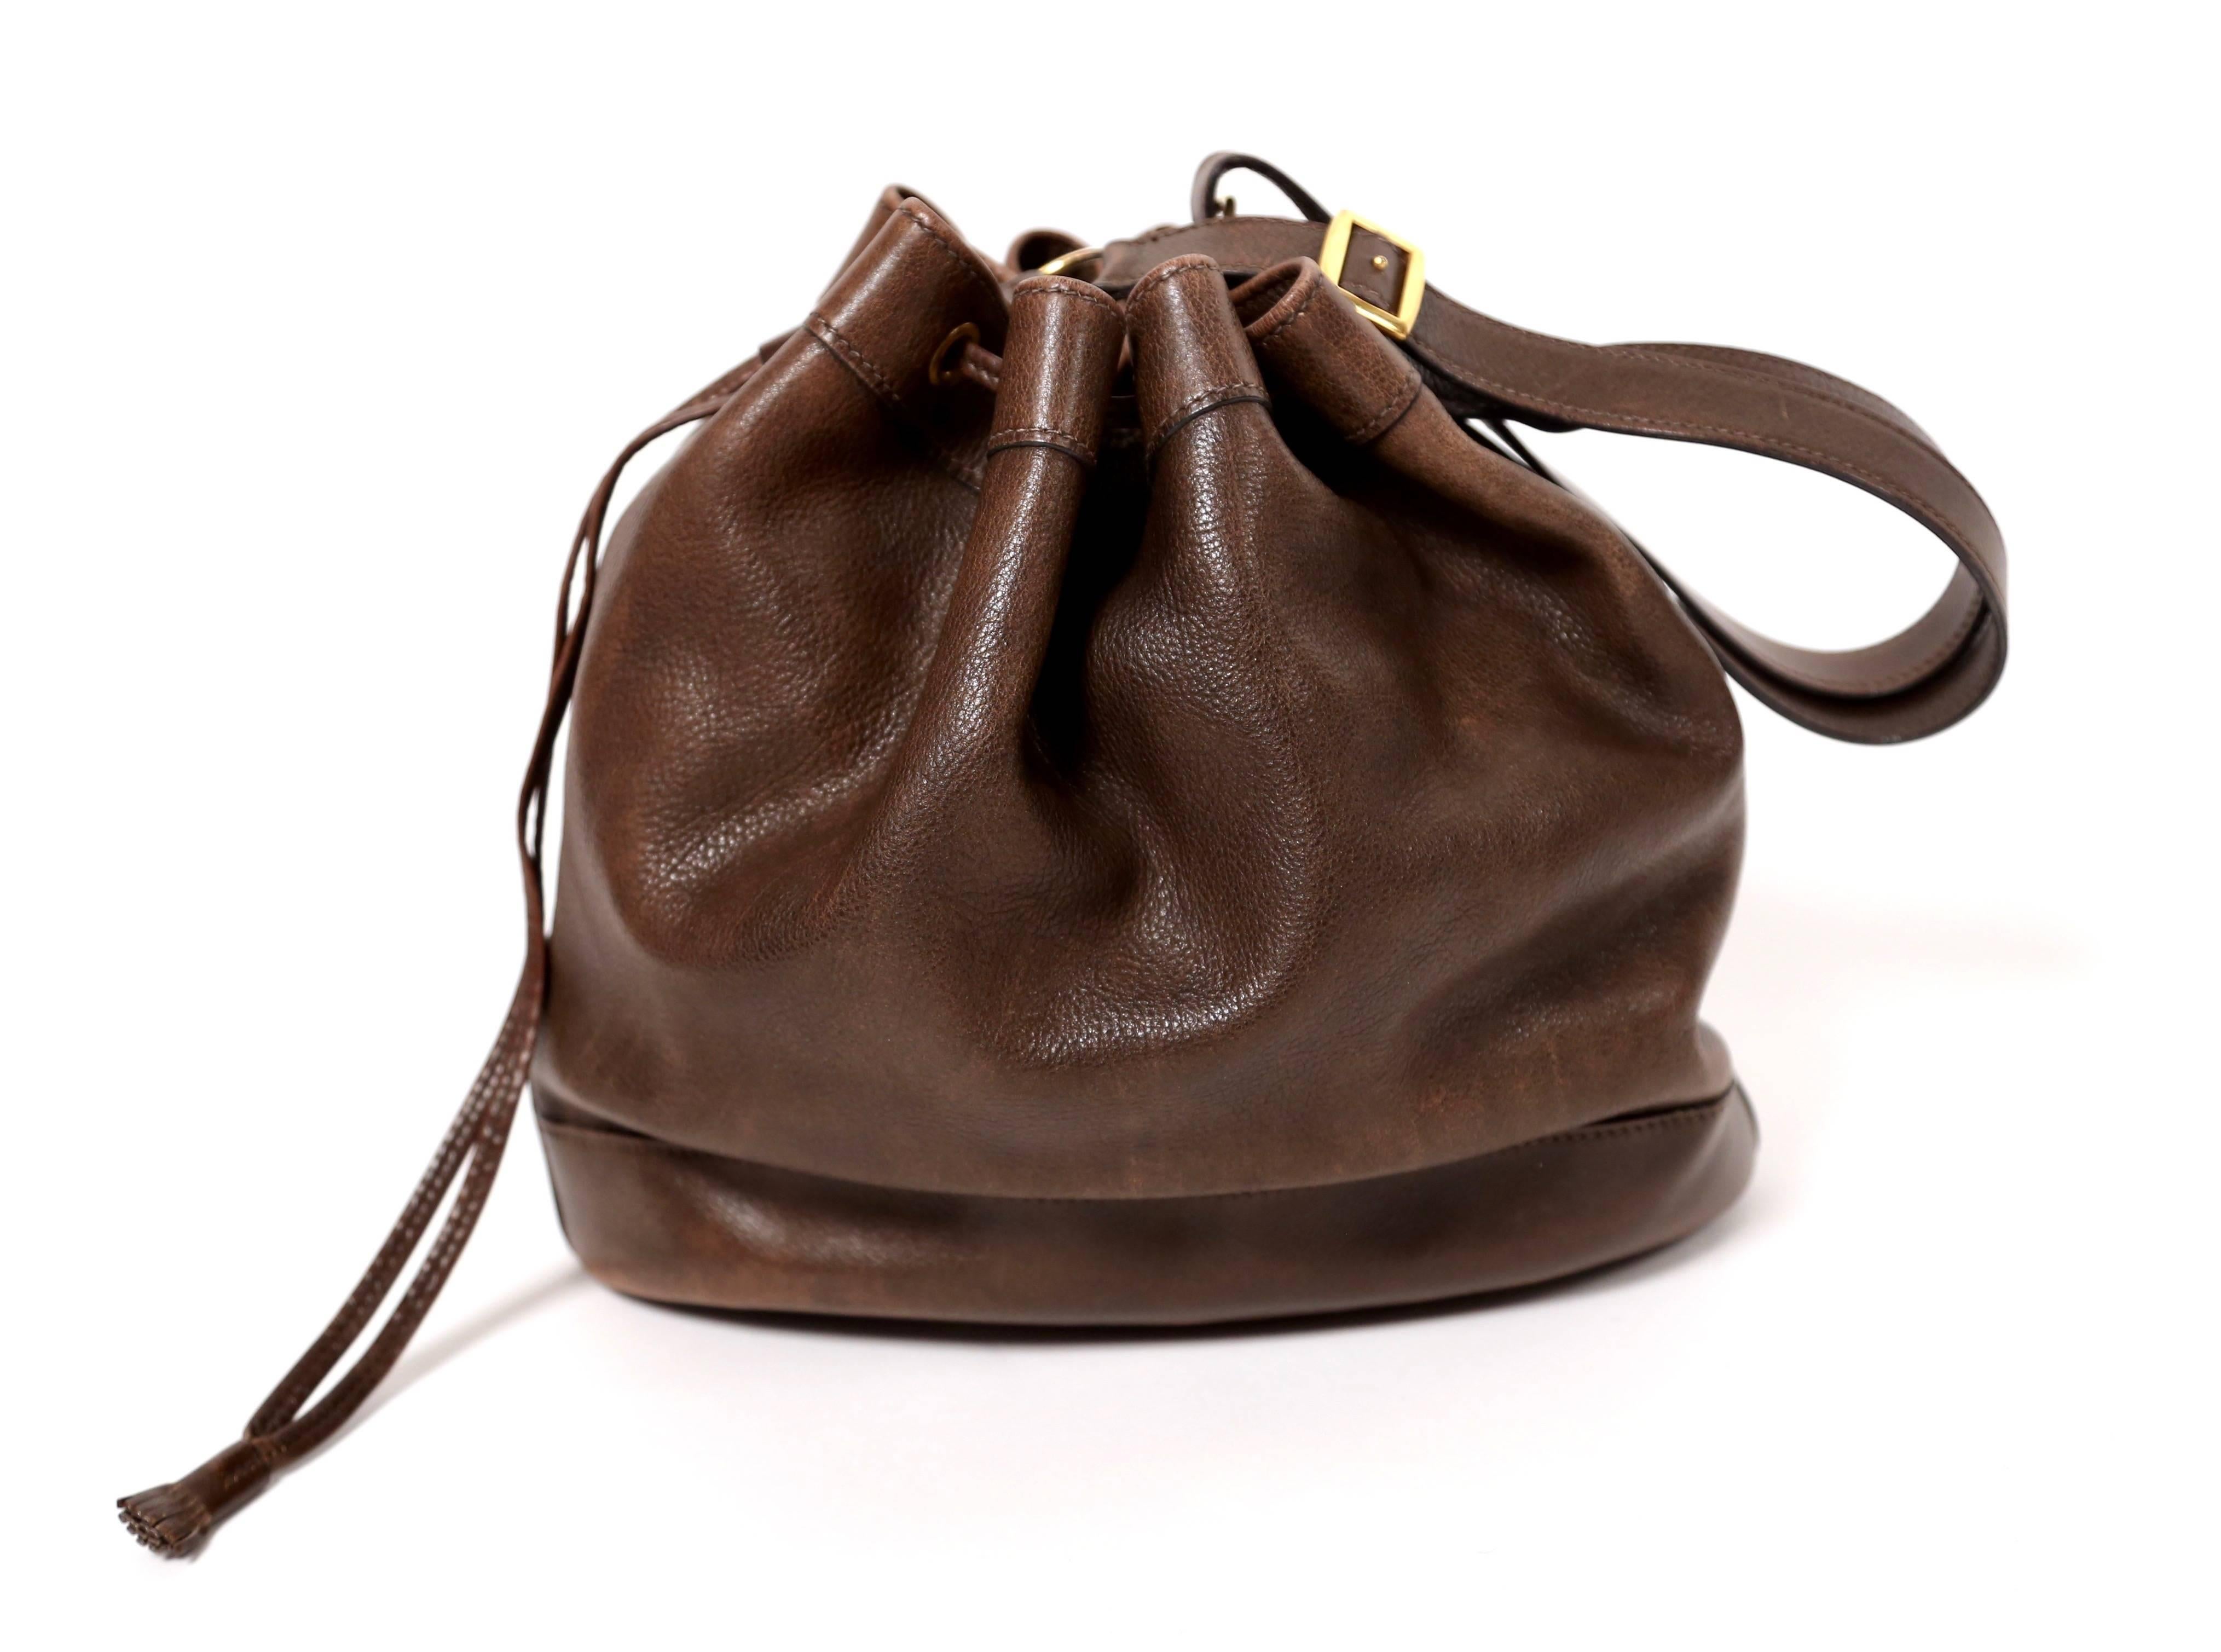 Rich brown leather 'Market' bag with stunning patina from Hermes dating to 1984.  Bag has a patina that can only be achieved with age. Great slouch to leather. Approximate measurements: 10